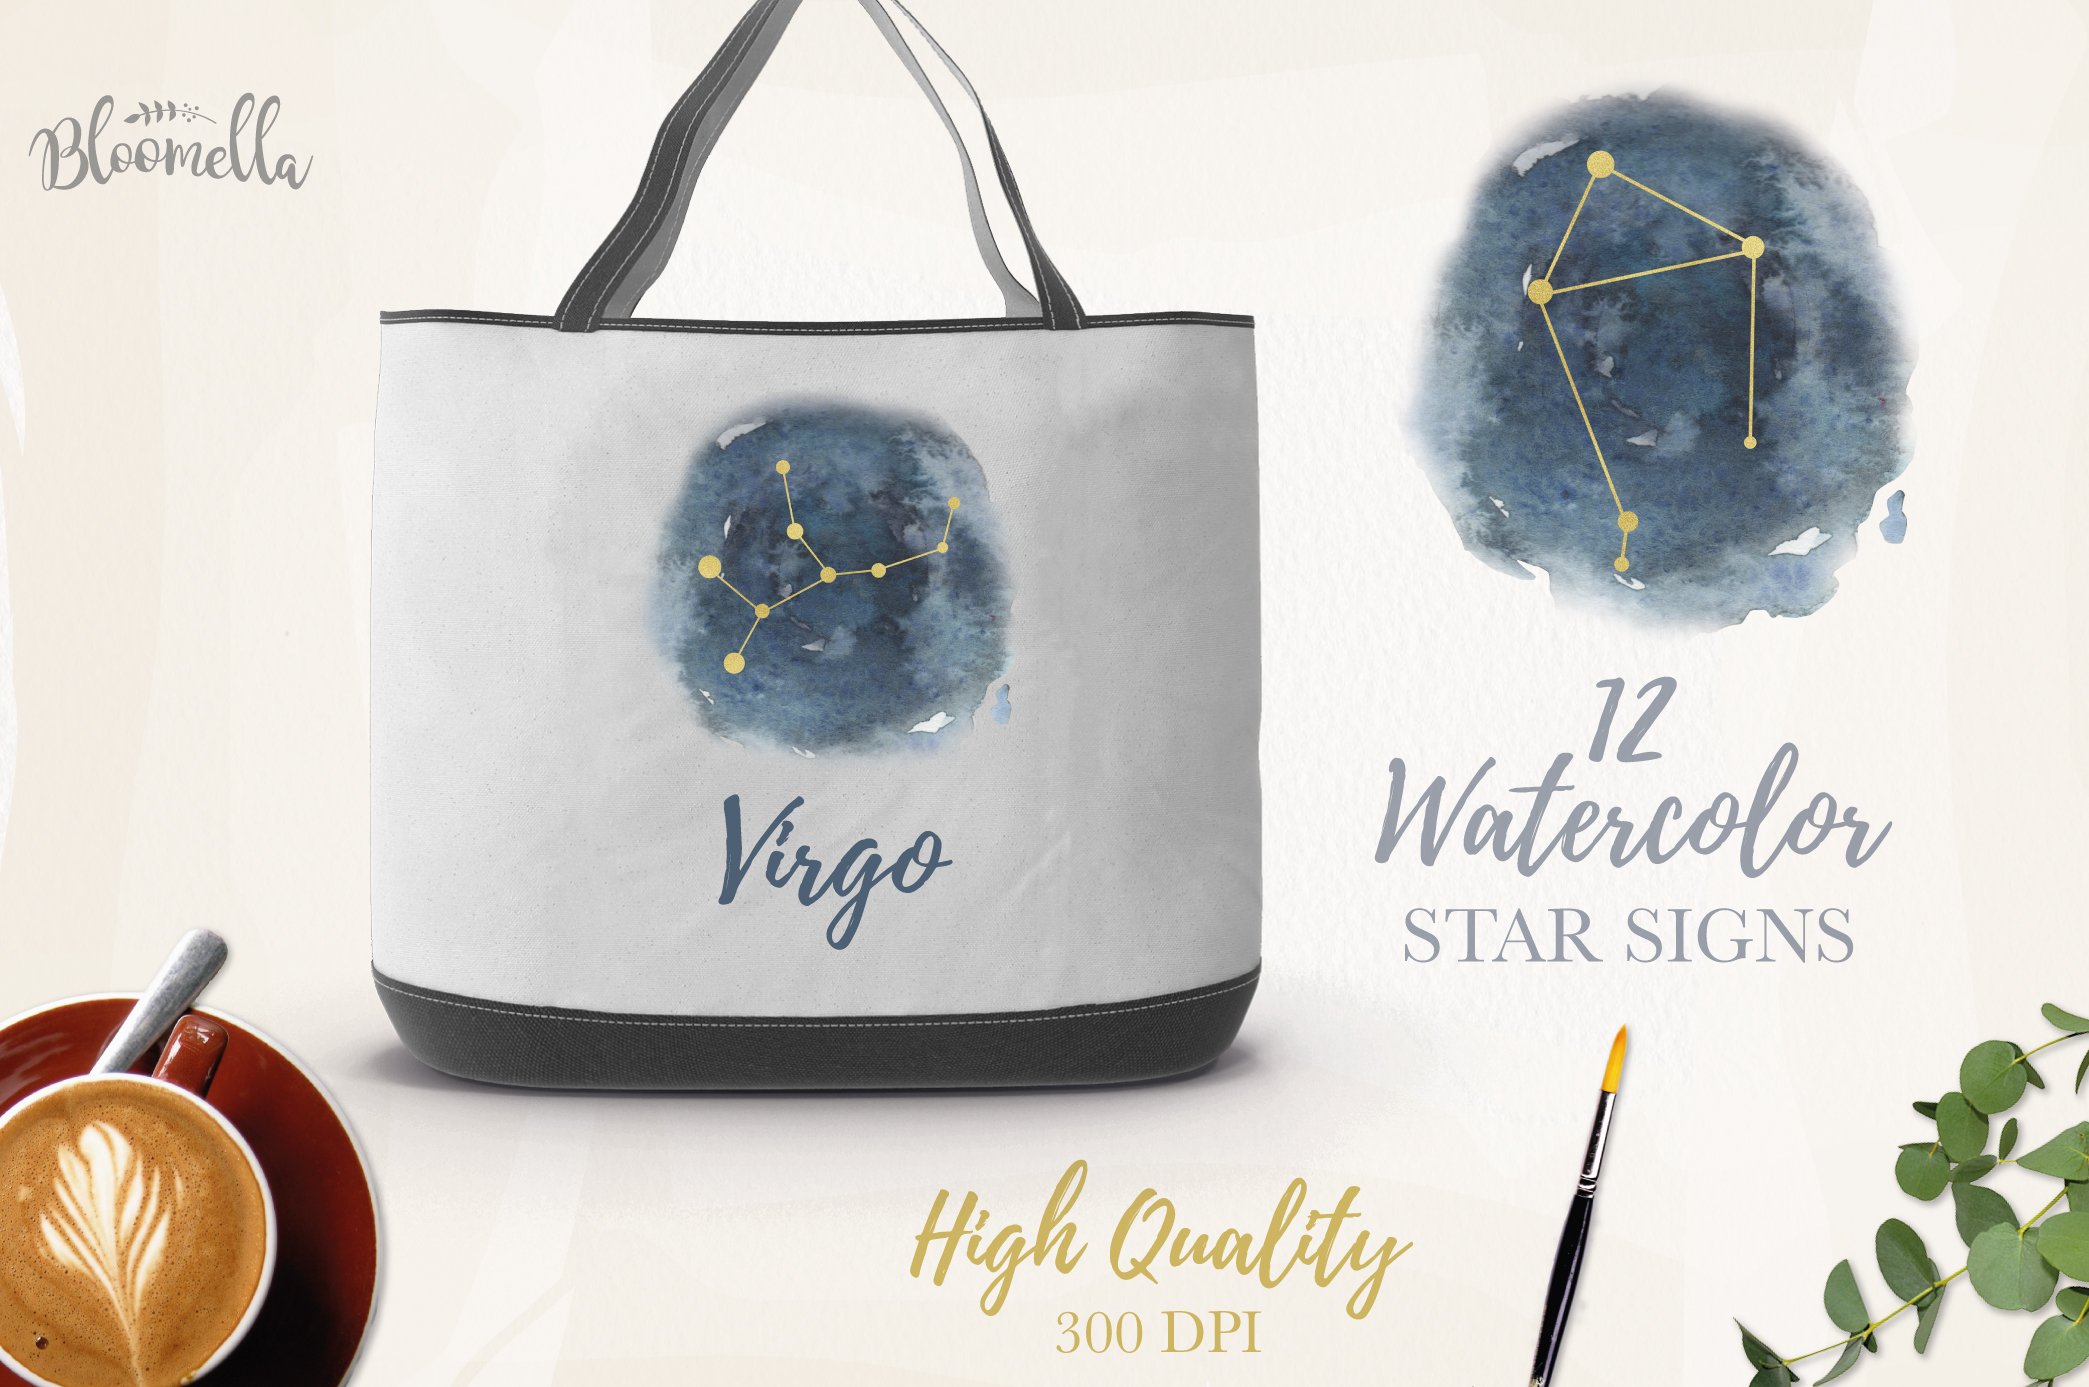 White eco bag with the blue border and star name.